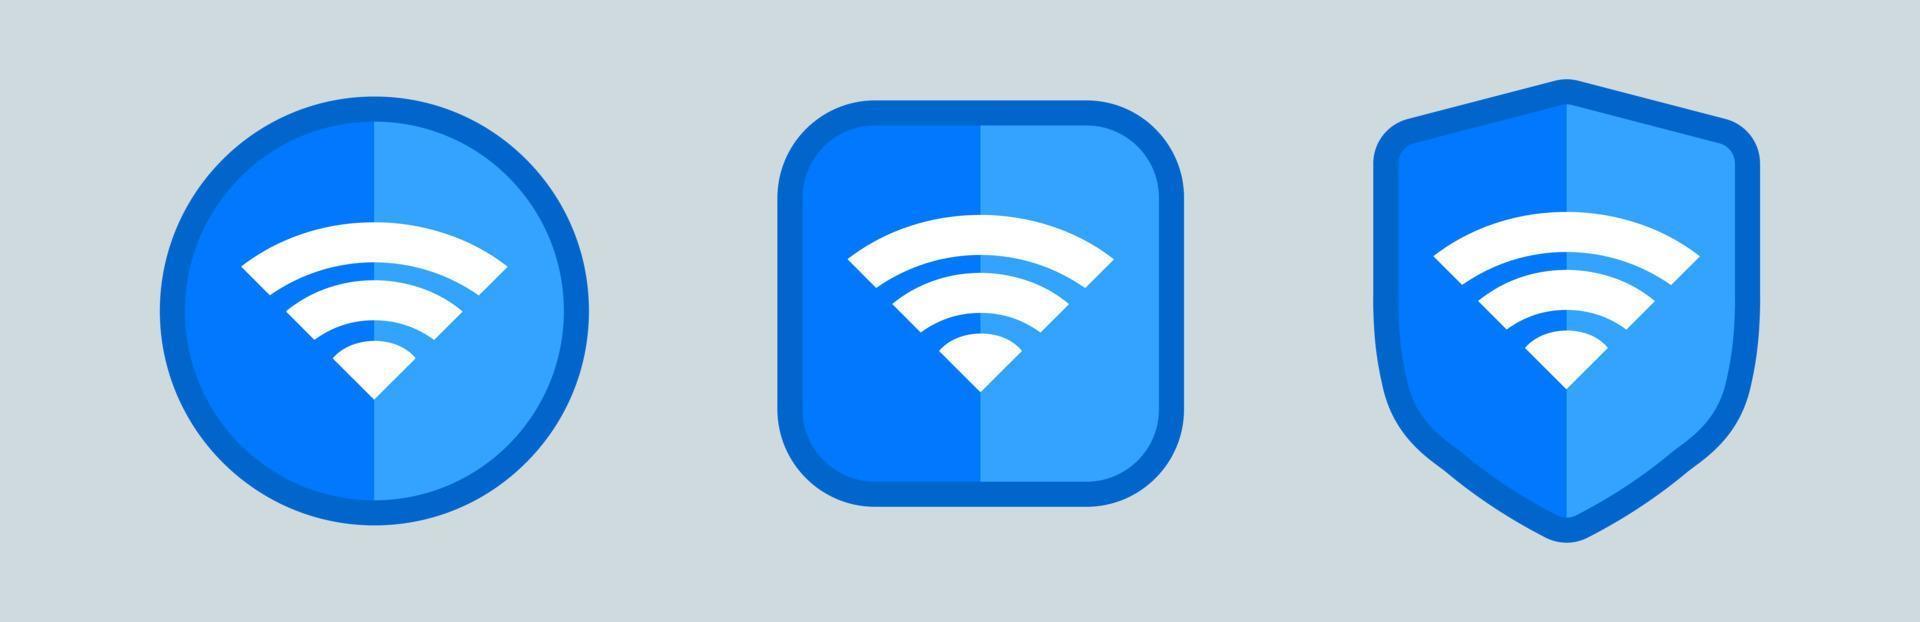 Wireless and wifi icon or sign for remote internet access. Different blue wifi icon set. vector